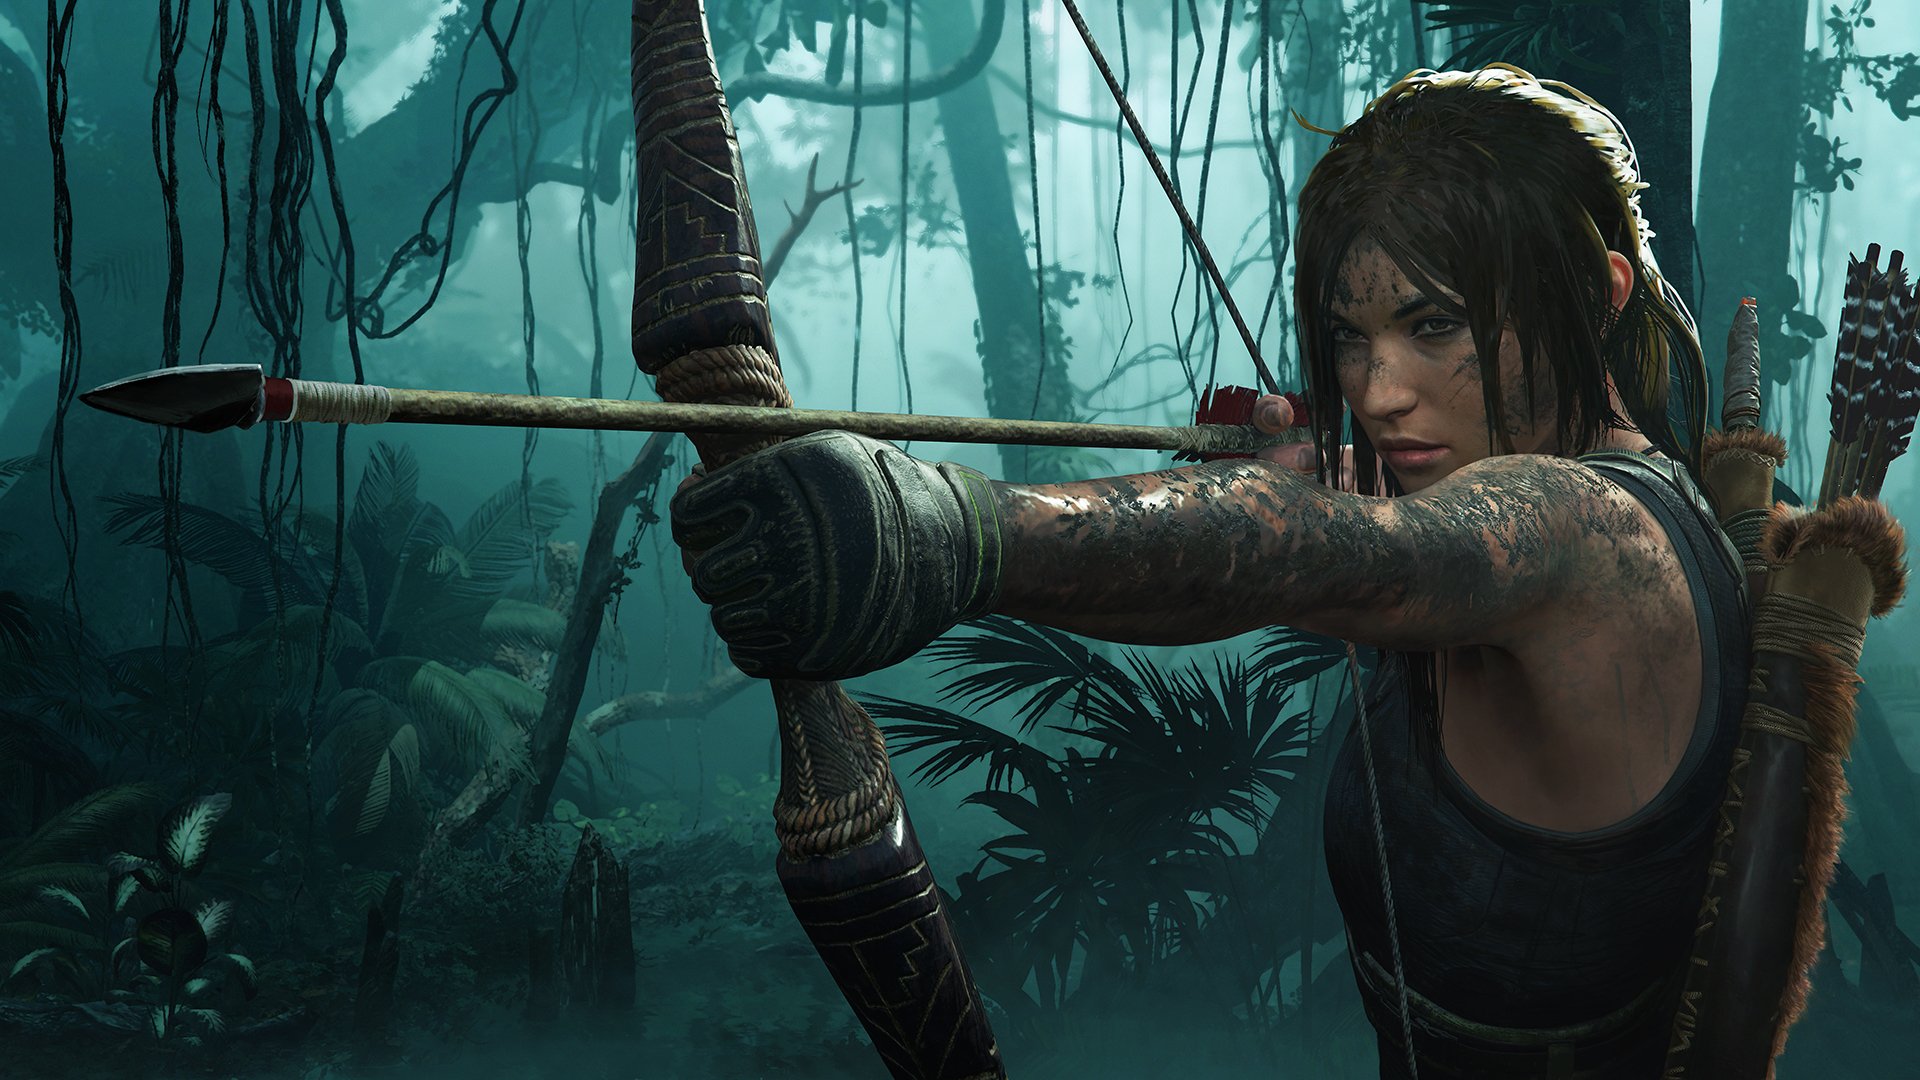 shadow-of-the-tomb-raider-banner.jpg